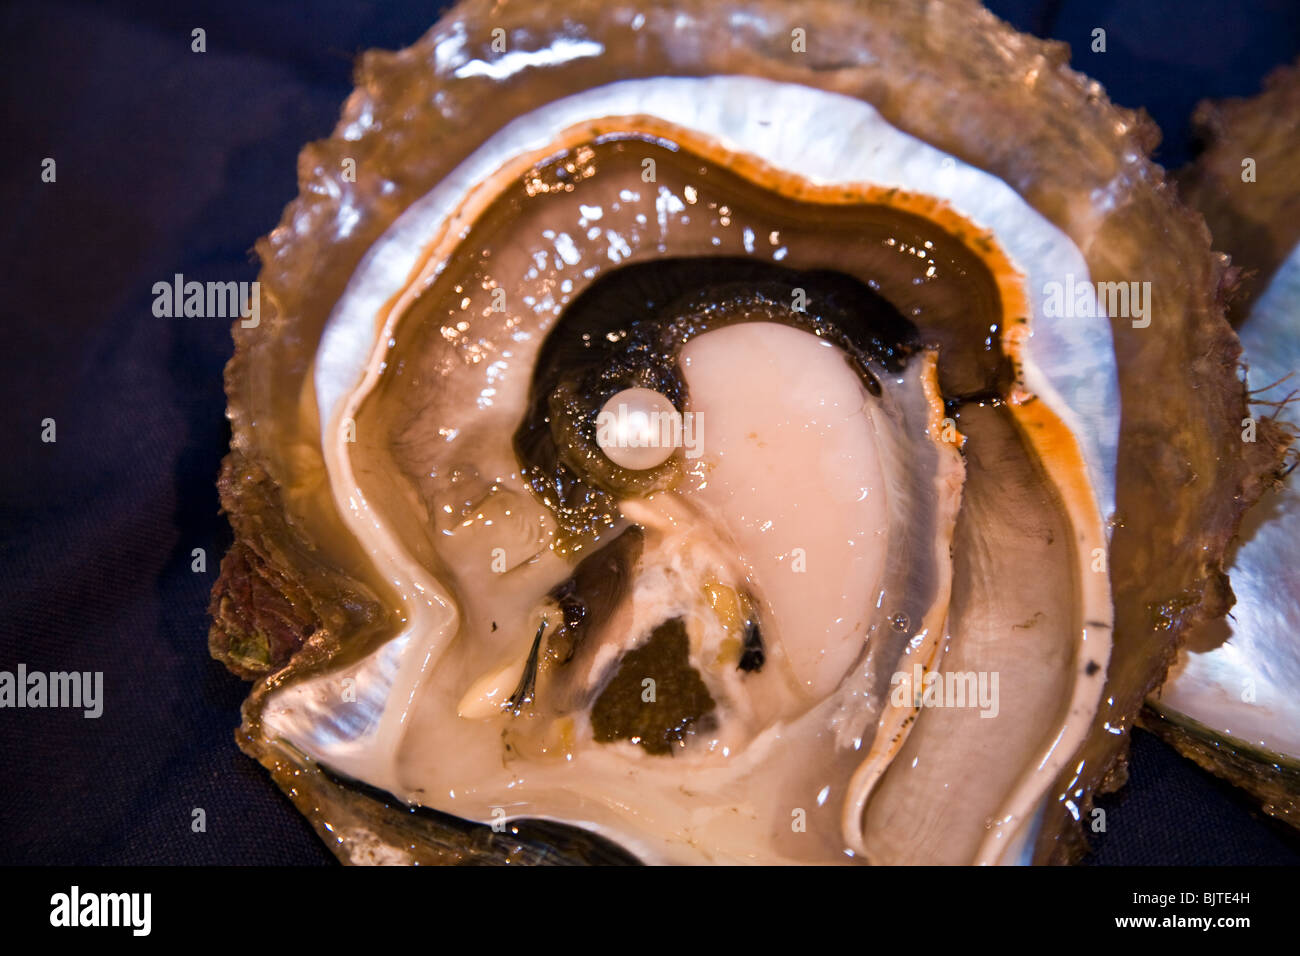 This just opened pearl shell raised on the Paspaley Pearl Farm in Vansittart Bay reveals a splendid specimen, Western Australia. Stock Photo